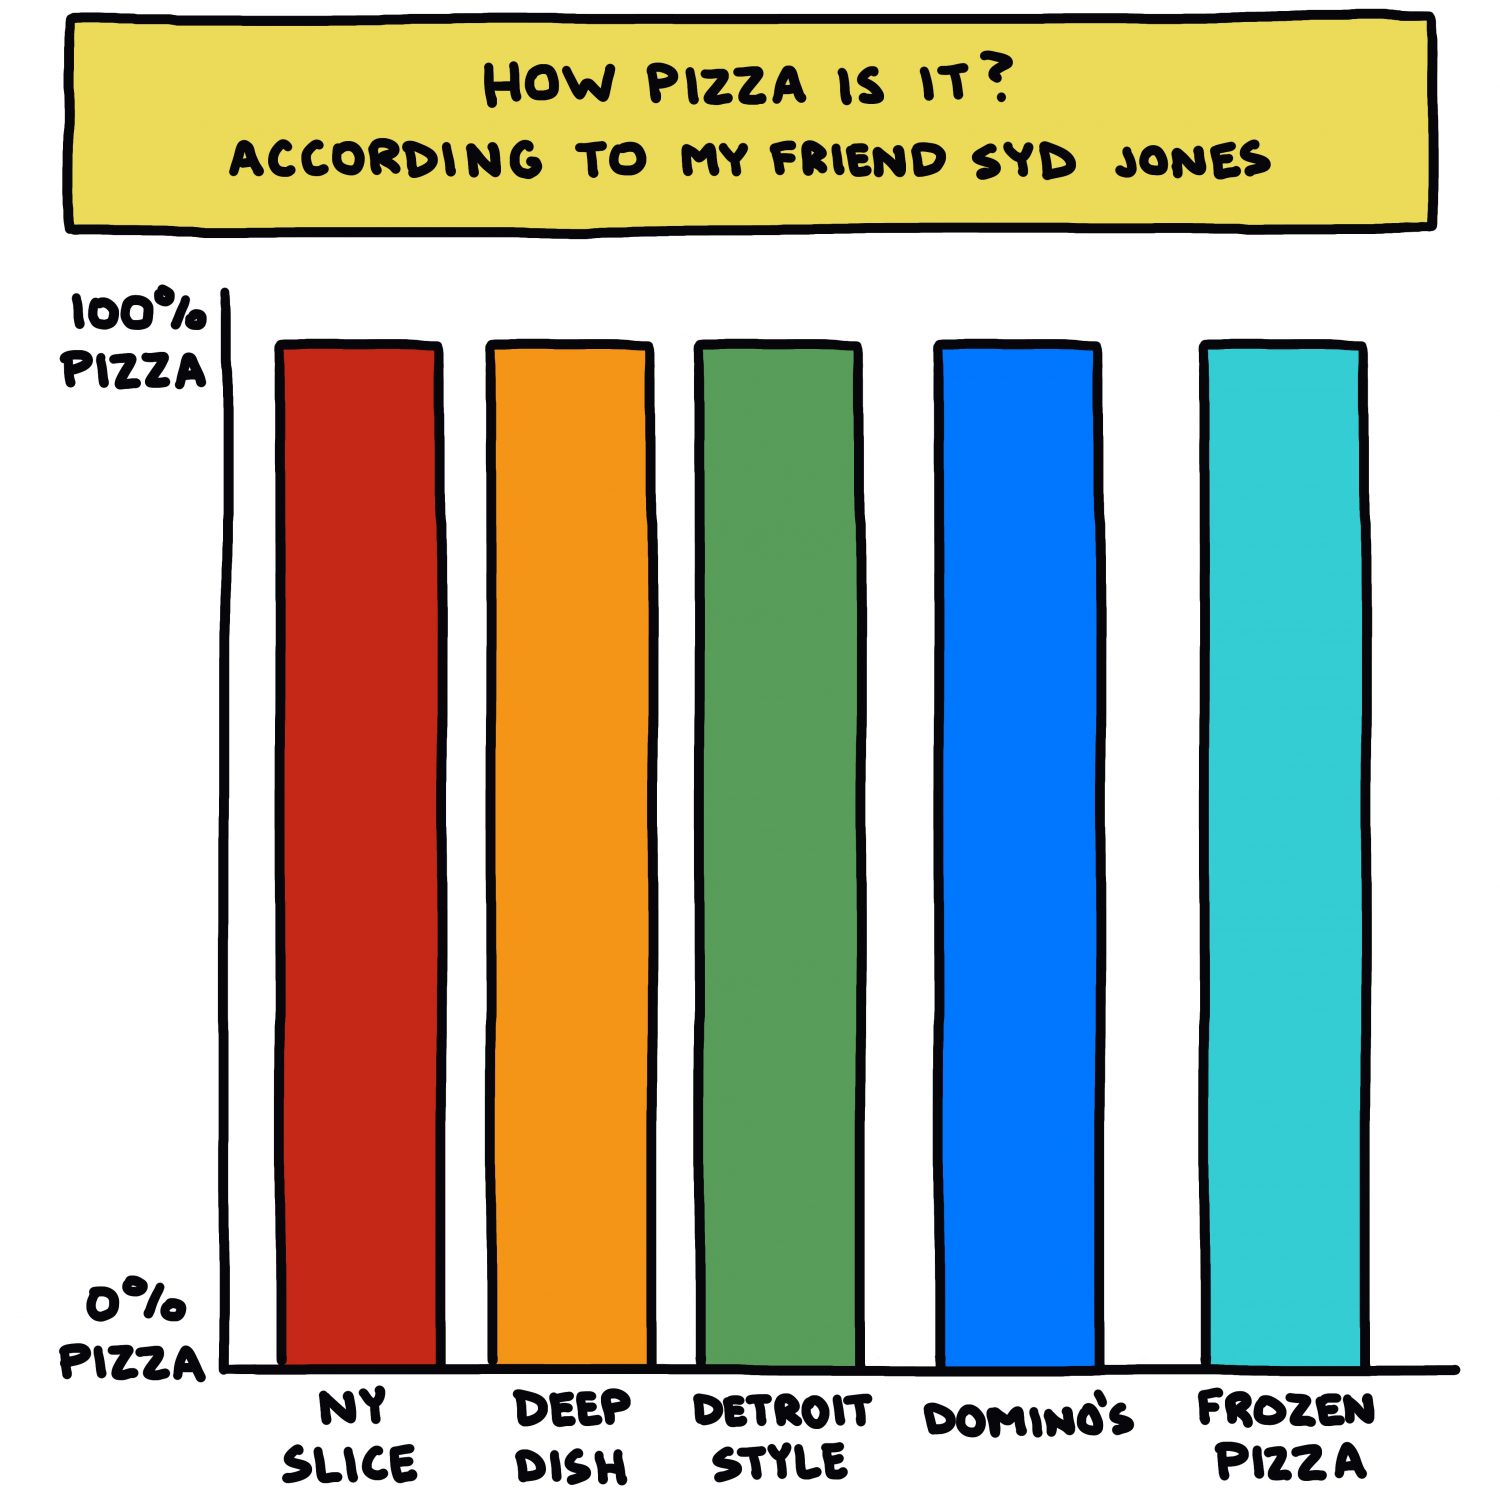 How Pizza Is It?